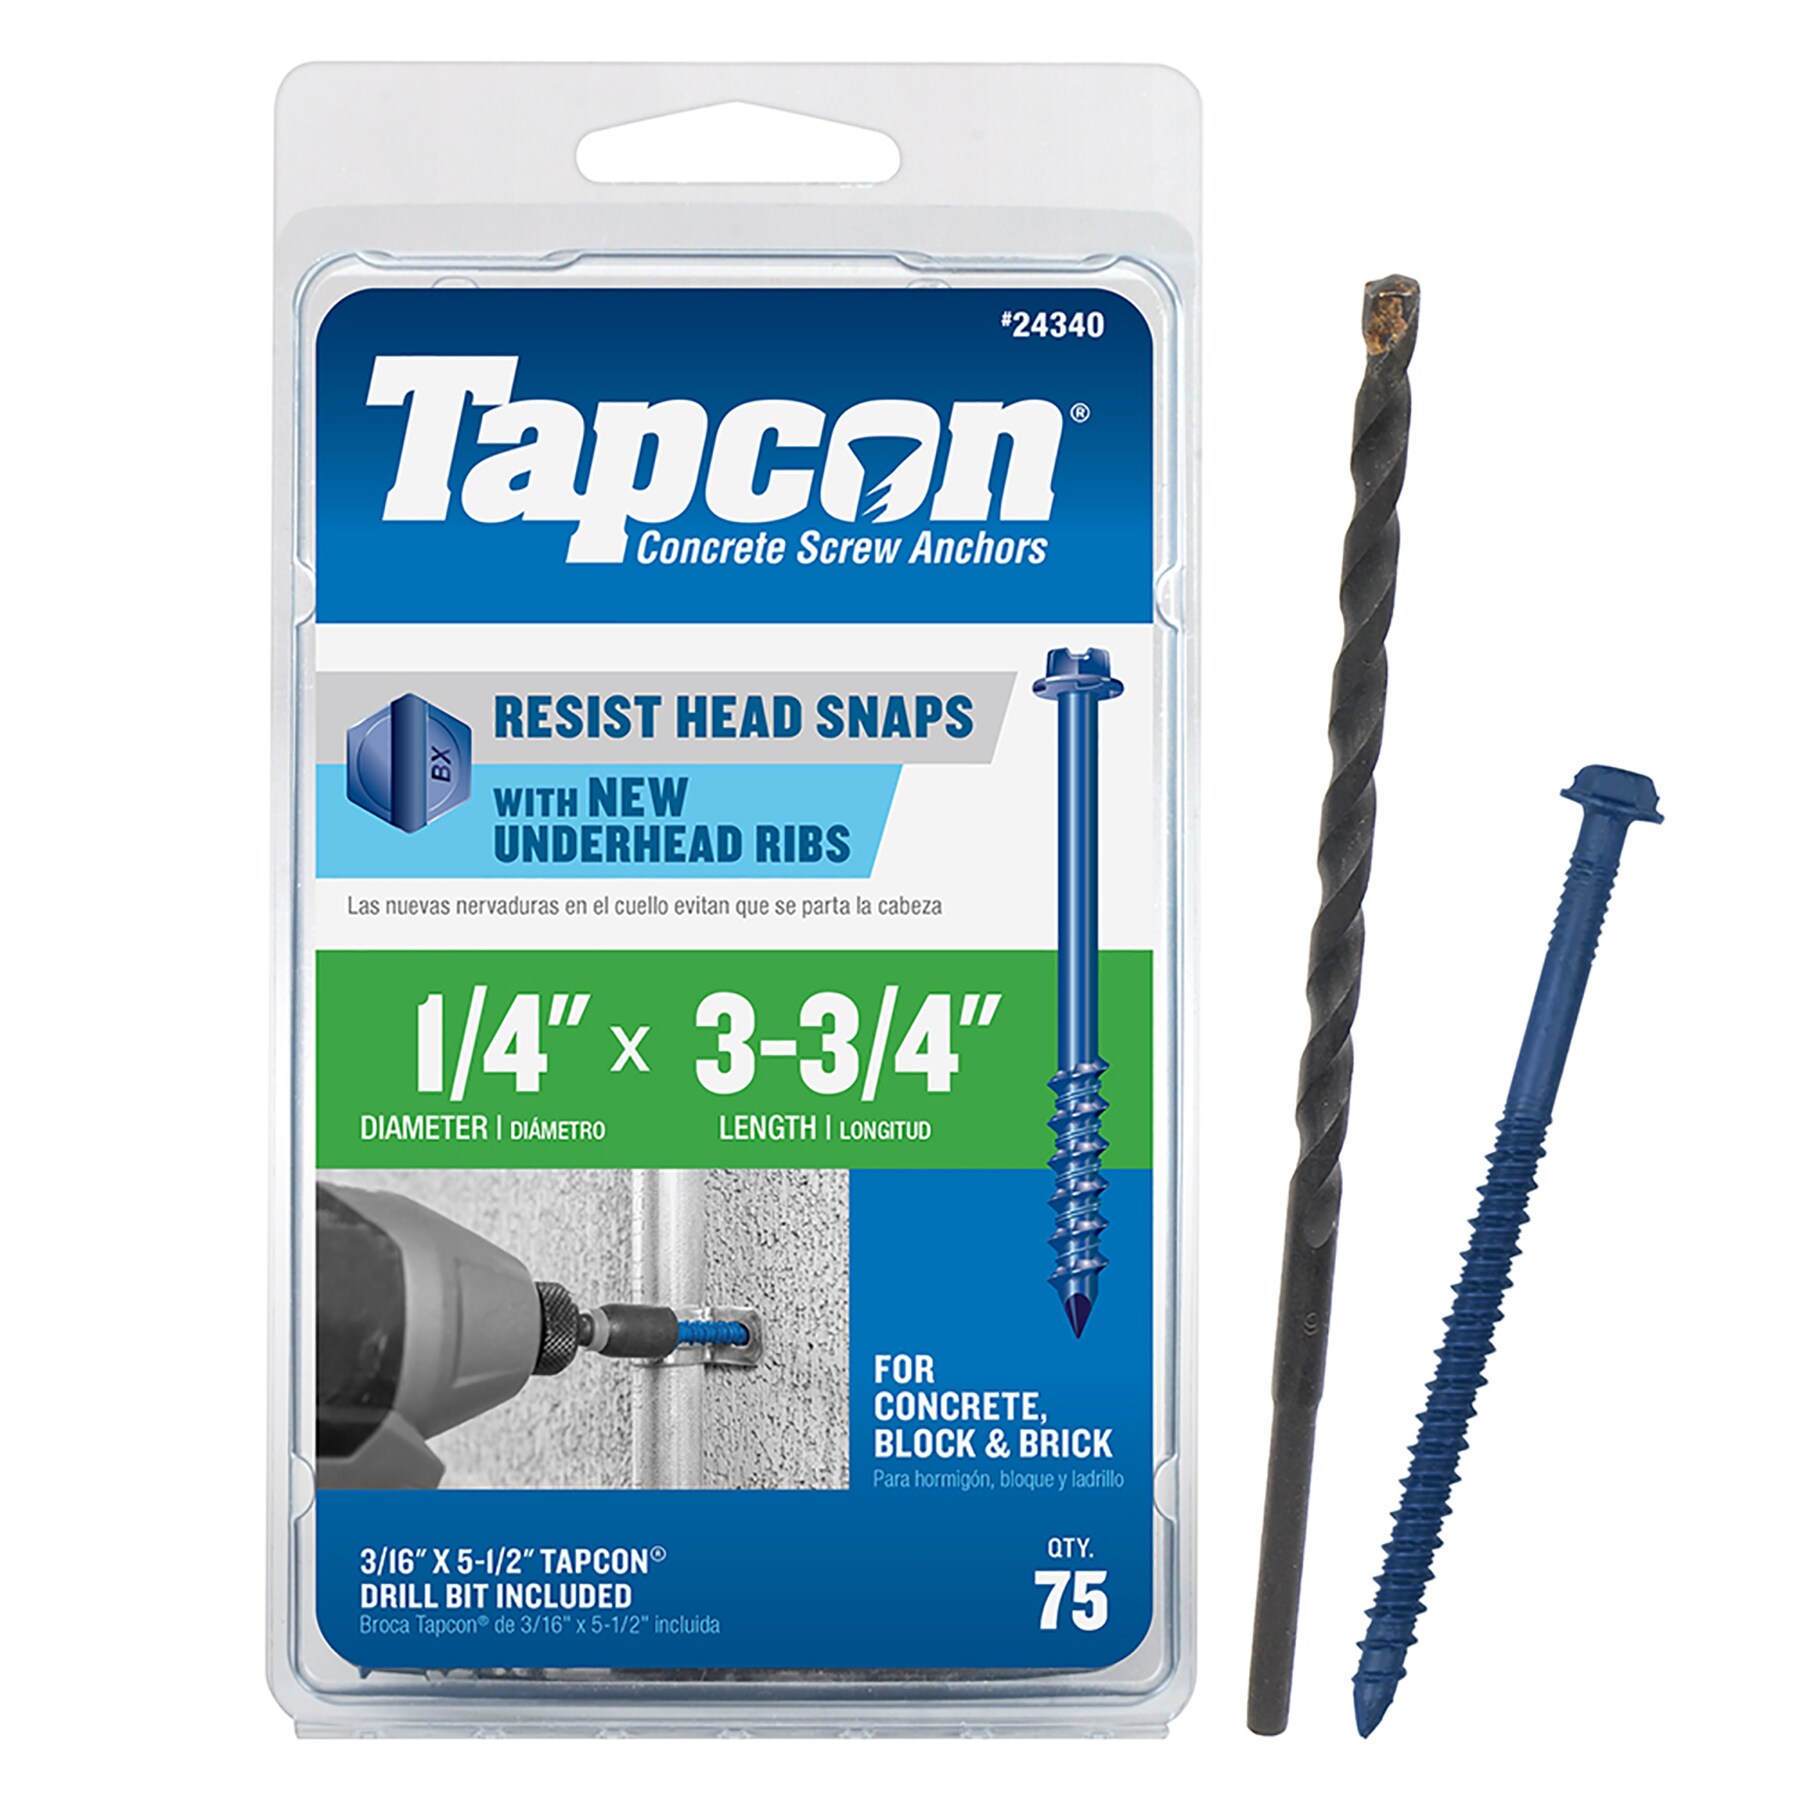 1/4 Tapcon Style Concrete Screws with Bit Slotted Hex Washer Head Concrete Screws to Anchor Masonry Block & Brick 1/4 x 1-3/4 Qty 100 